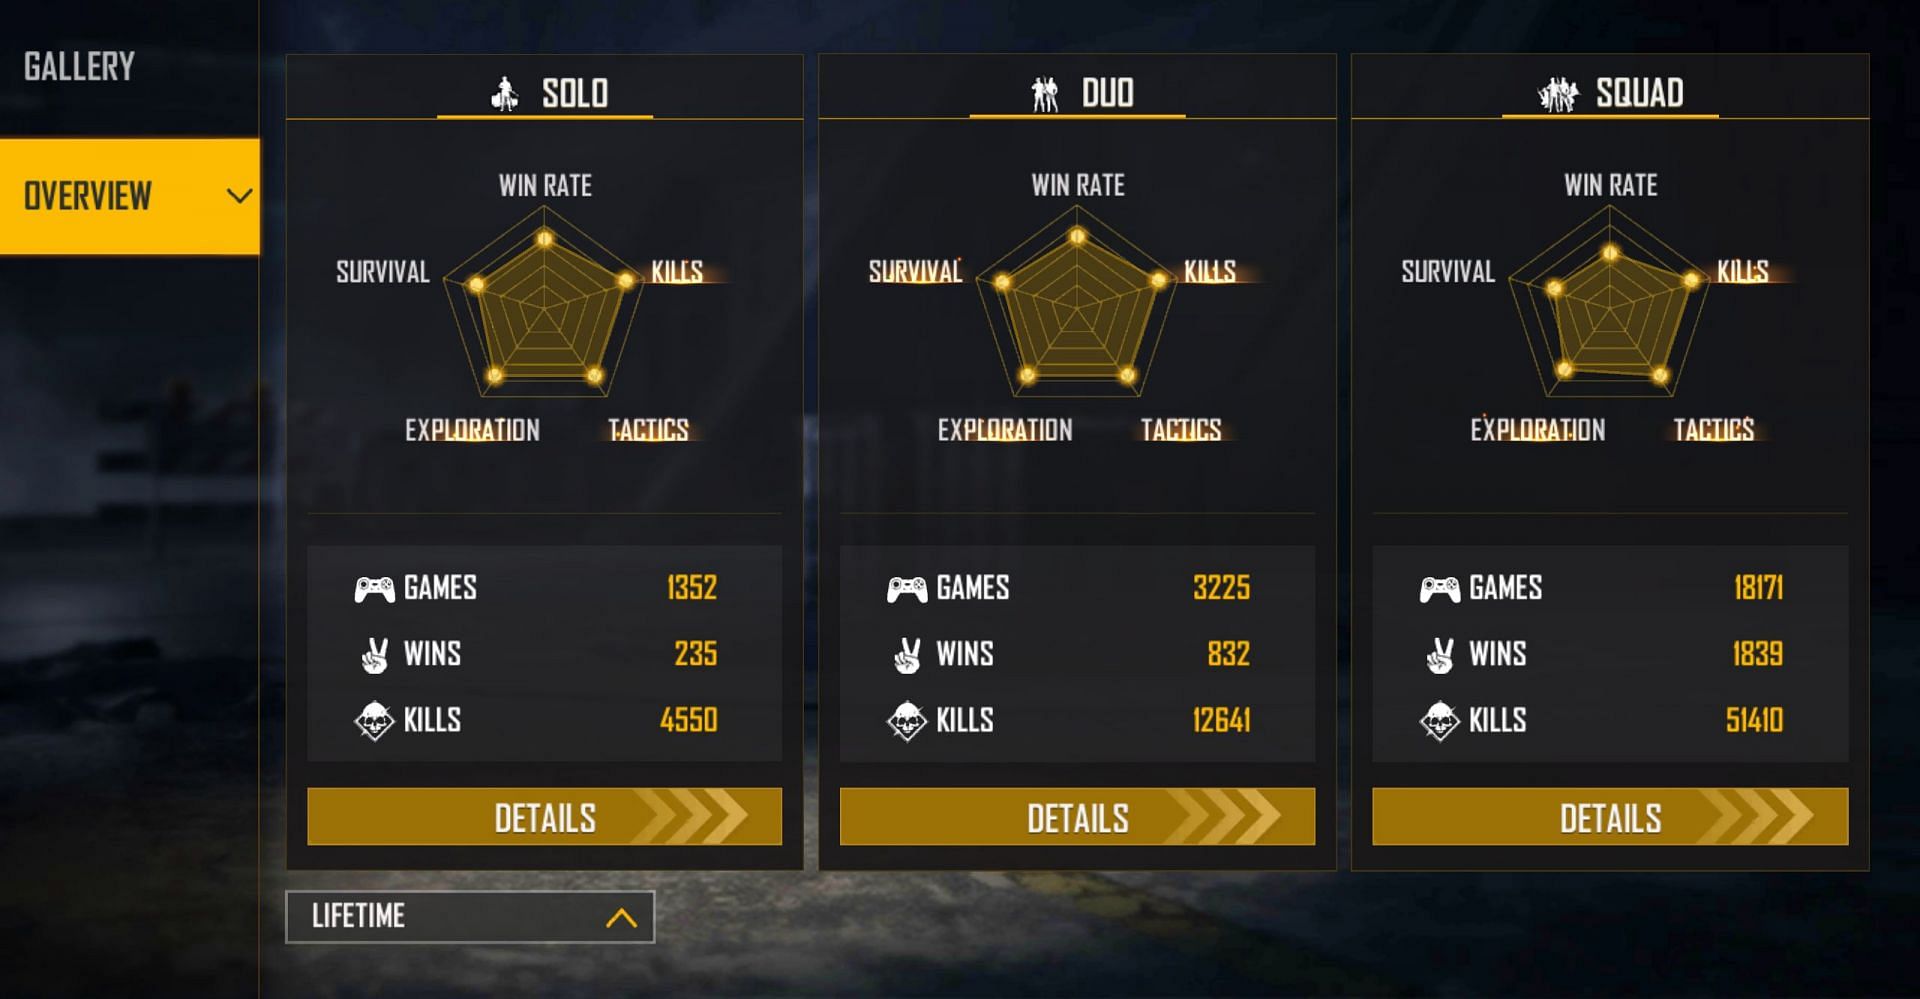 M8N has a headshot rate of 36.37% in squad games (Image via Free Fire)